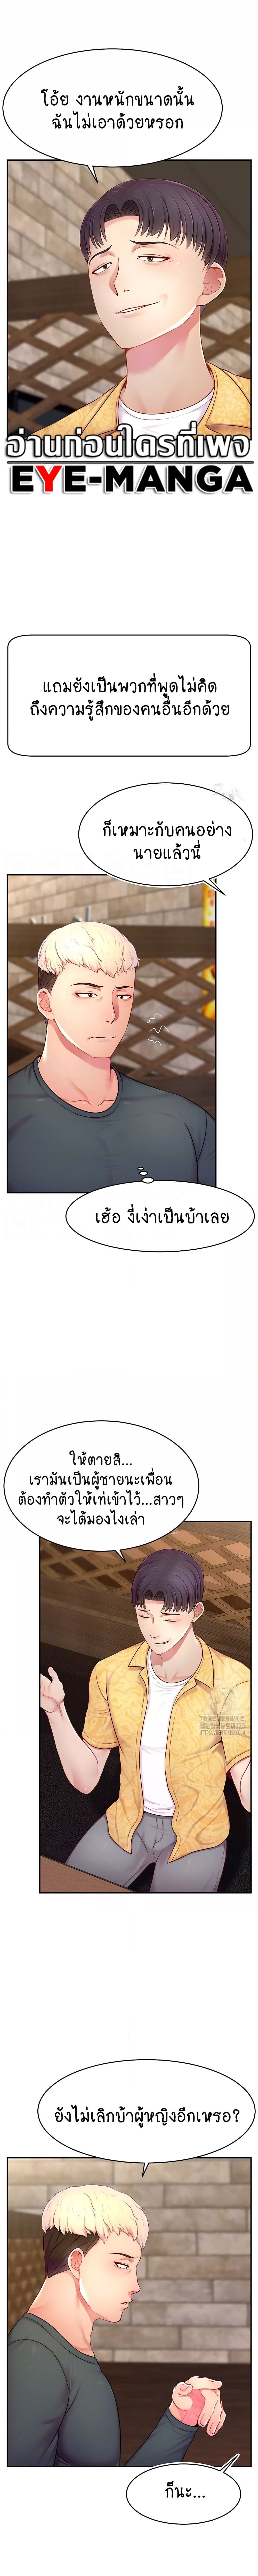 Making Friends With Streamers by Hacking! ตอนที่ 10 ภาพ 3